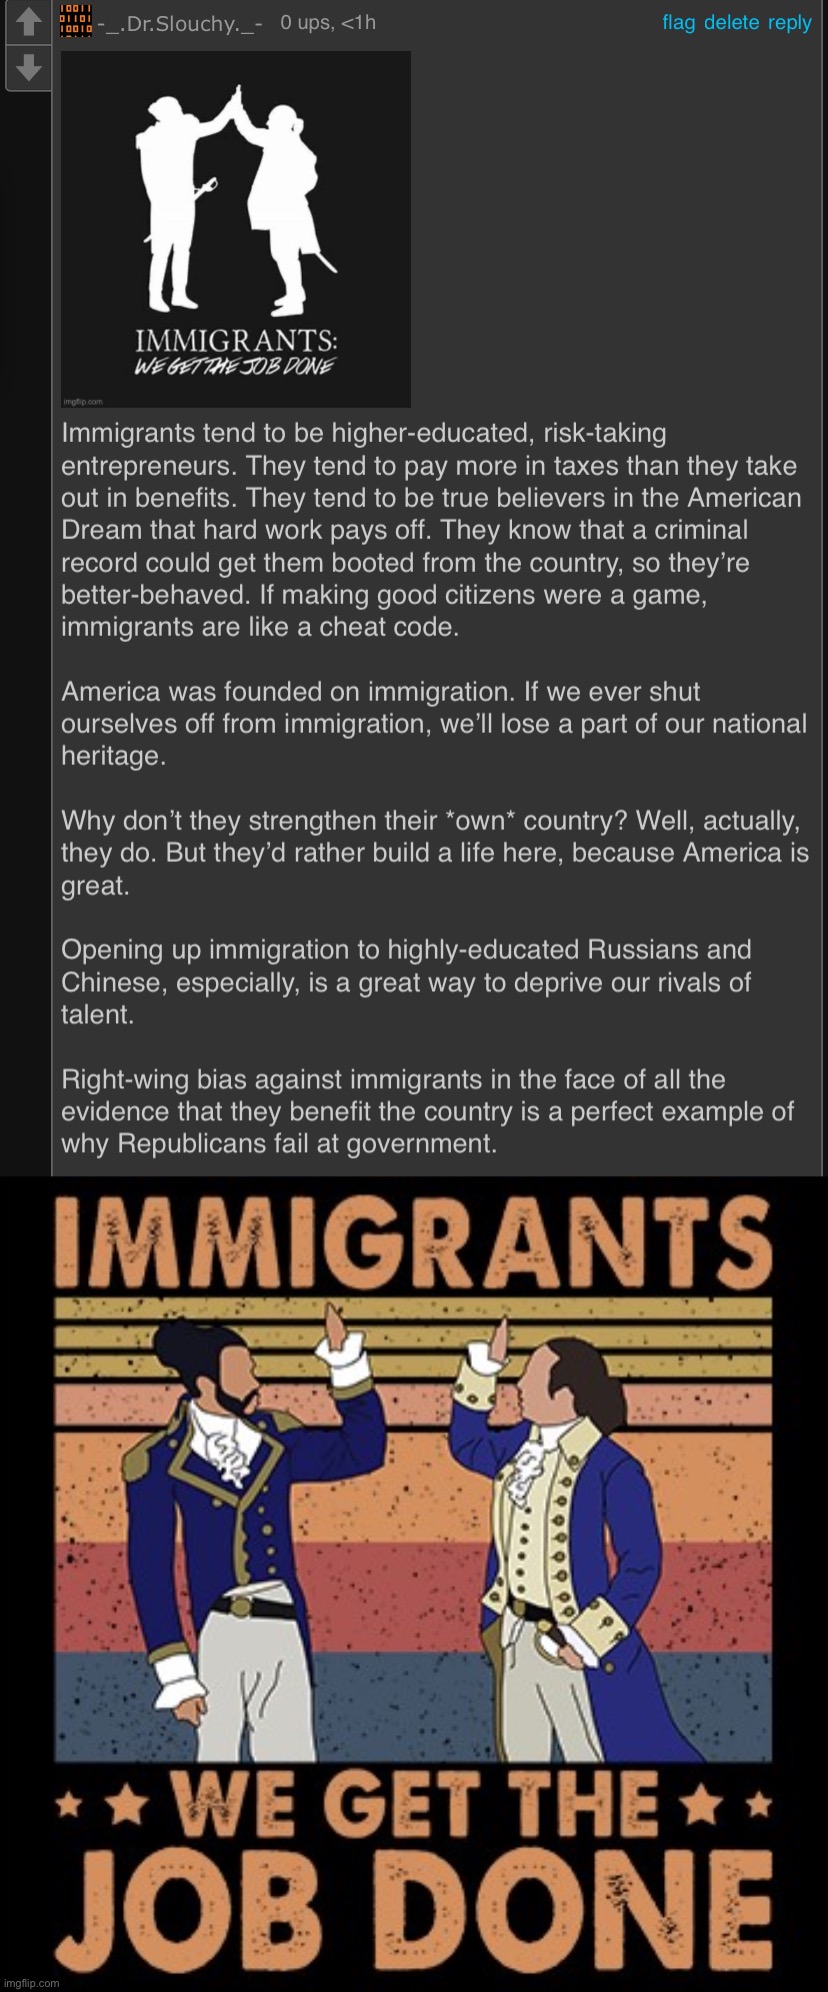 Let’s hear it for immigrants. | image tagged in dr slouchy immigrants get the job done,hamilton immigrants we get the job done | made w/ Imgflip meme maker